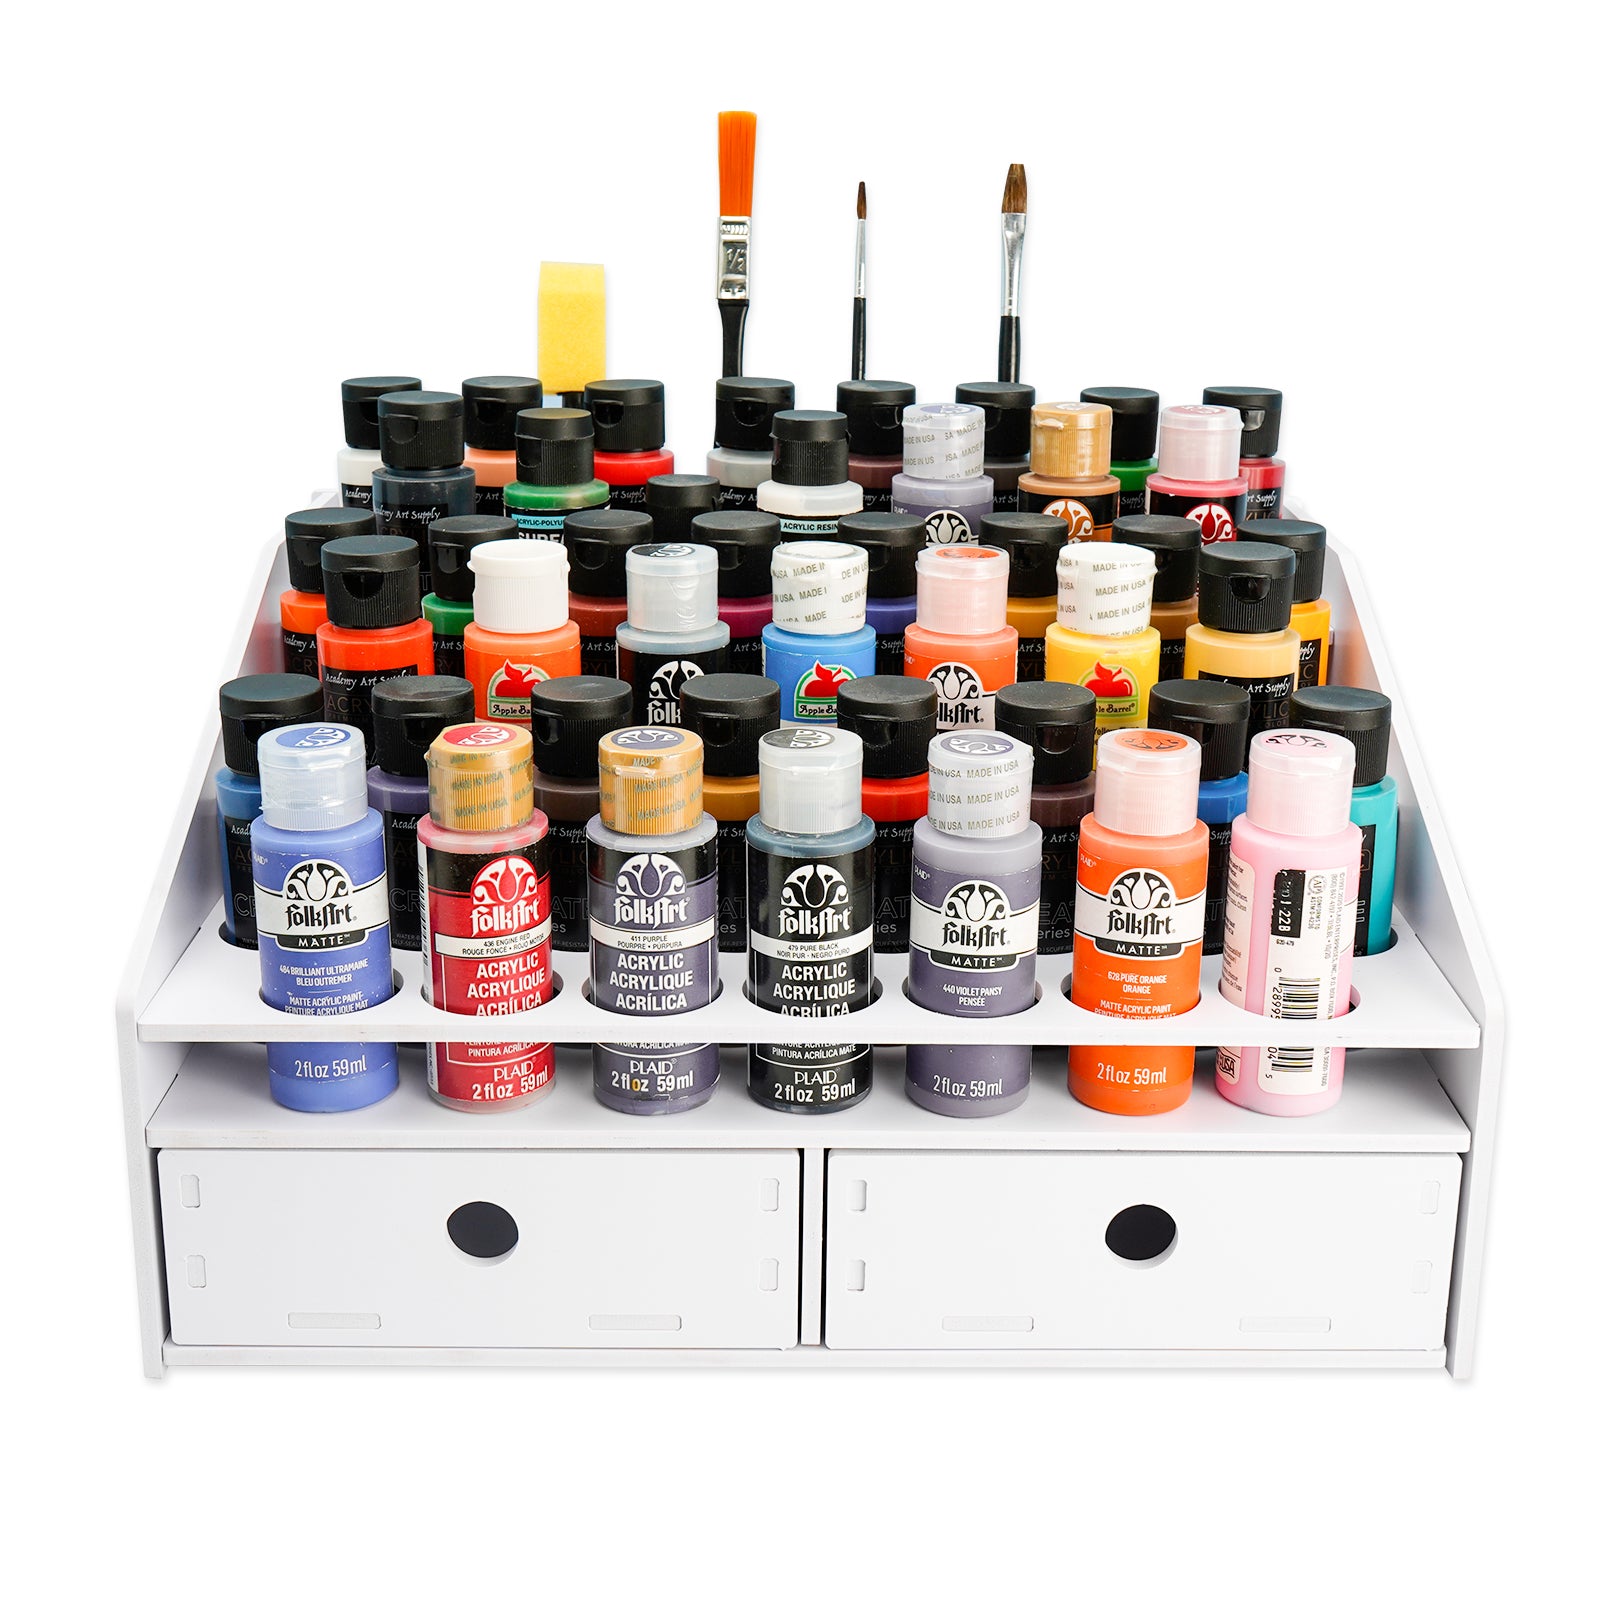  Acrylic Paint Organizer, Paint Rack Stand for 45